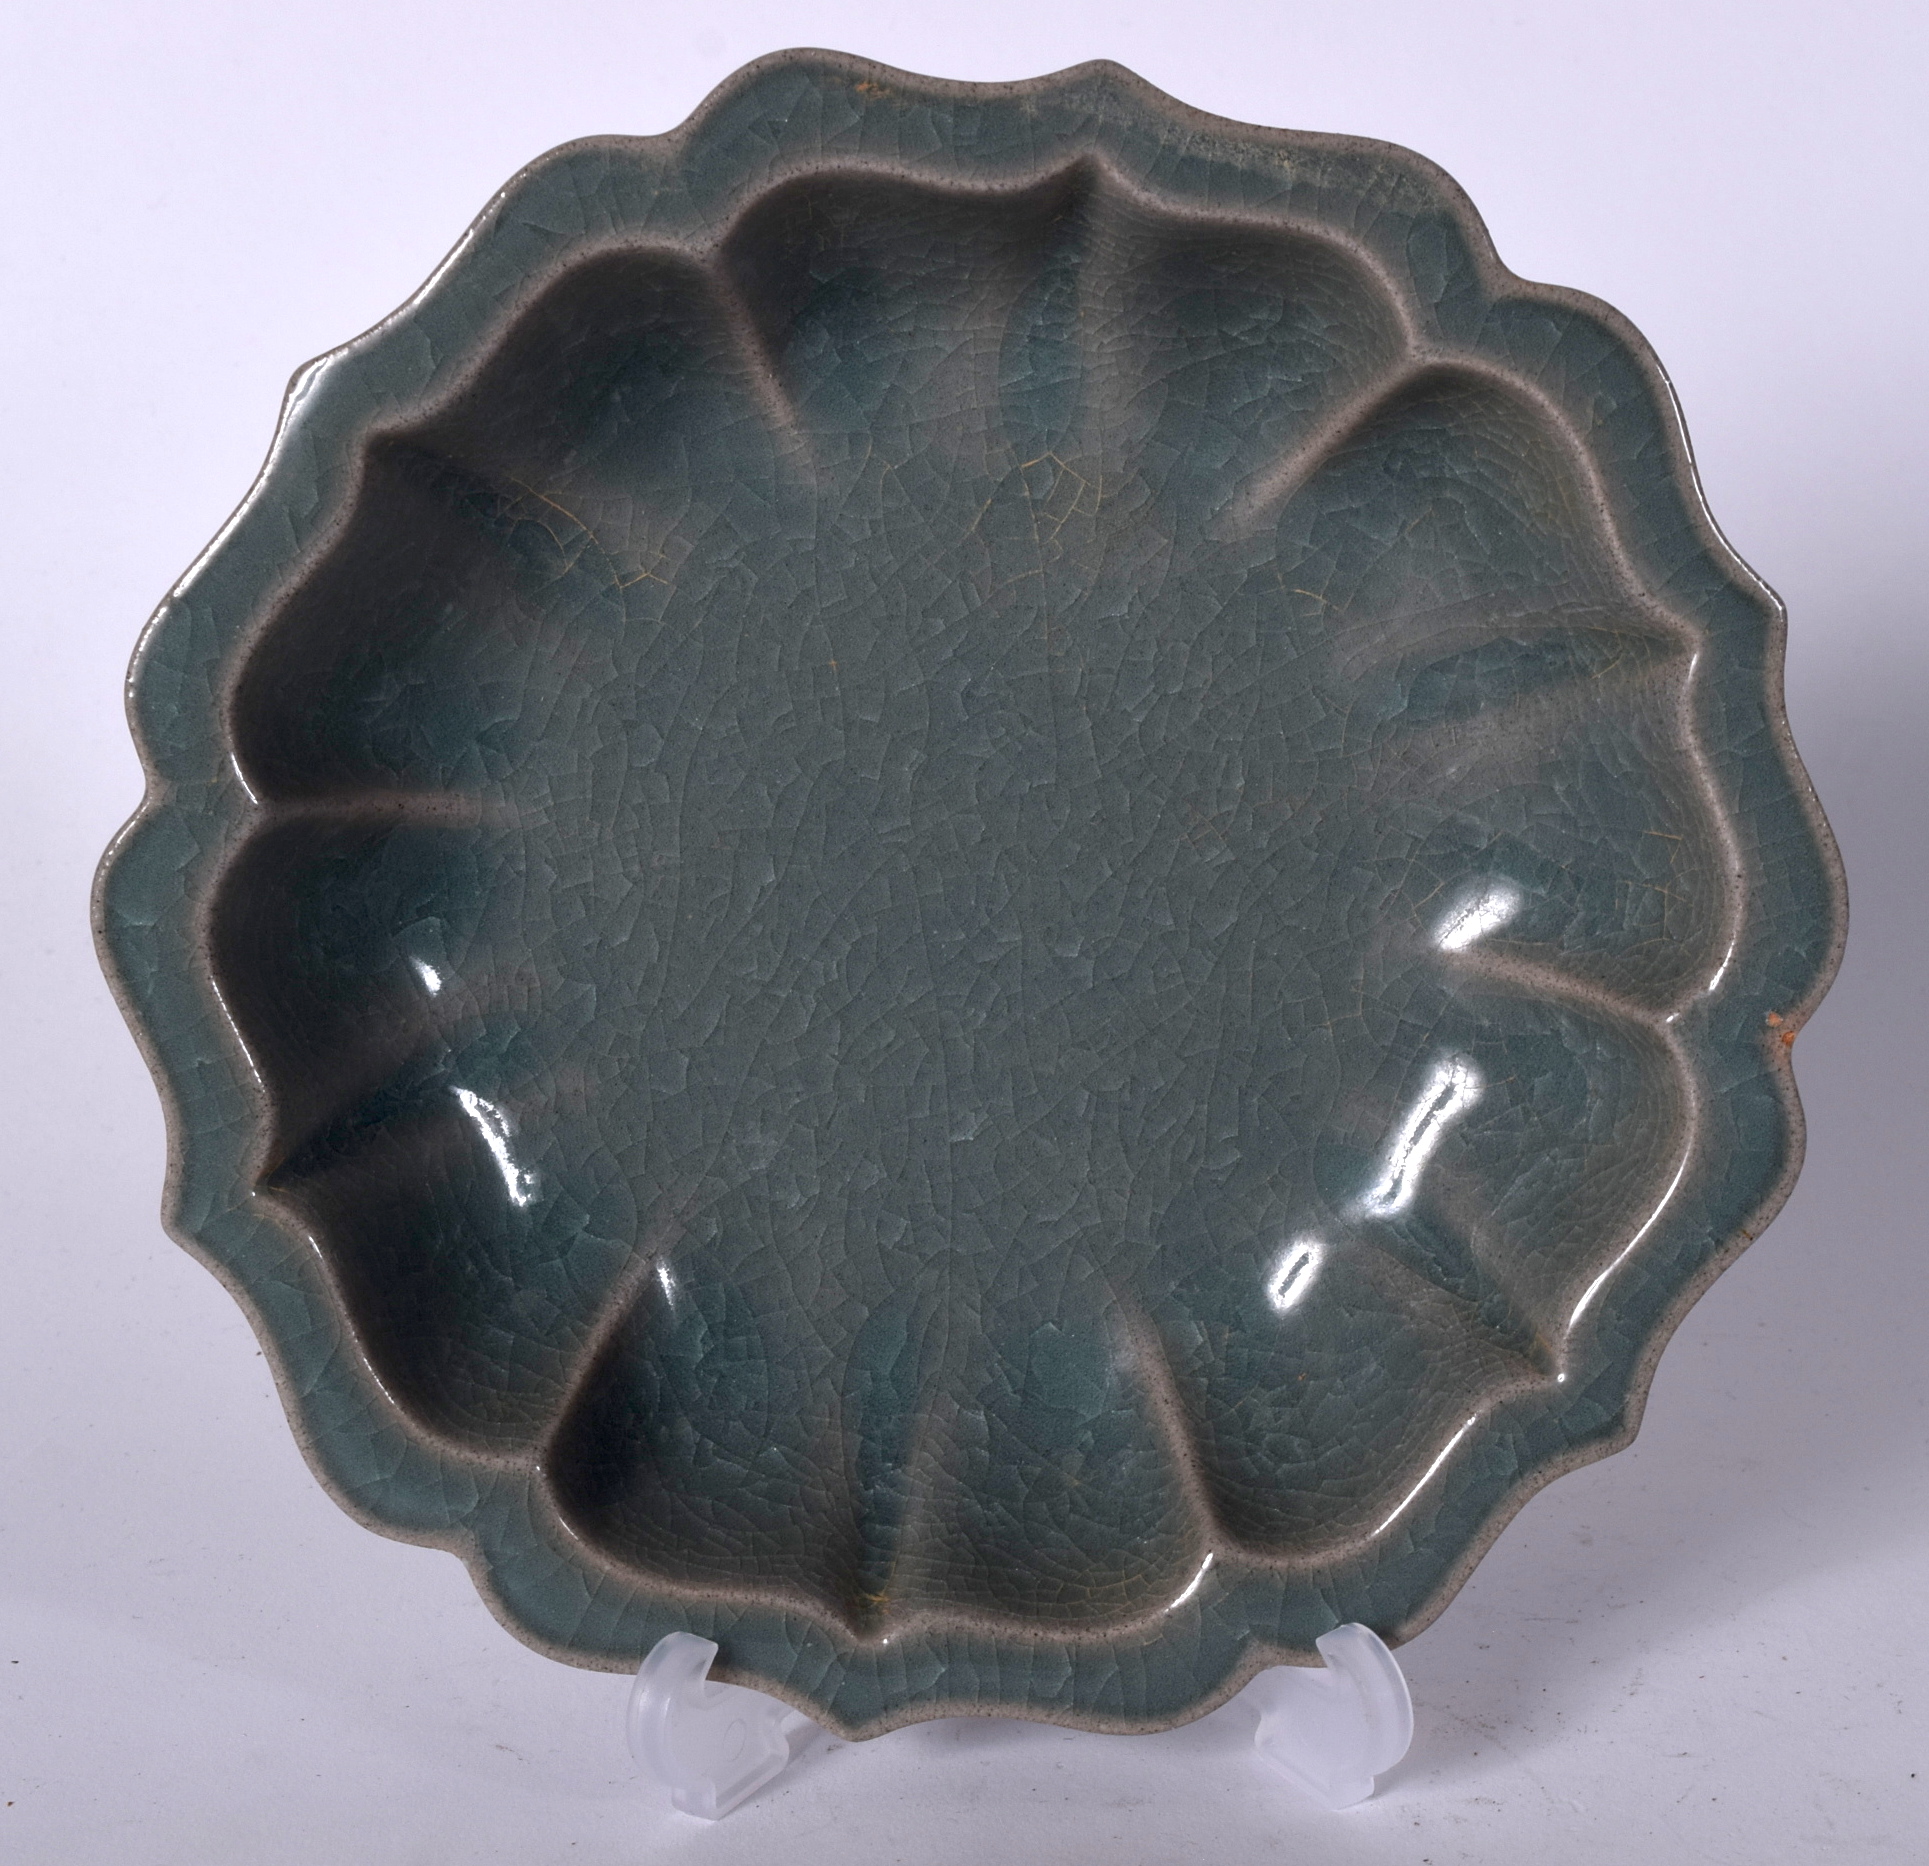 A CHINESE CELADON GLAZED PORCELAIN DISH, lobed in form. 19.5 cm wide.